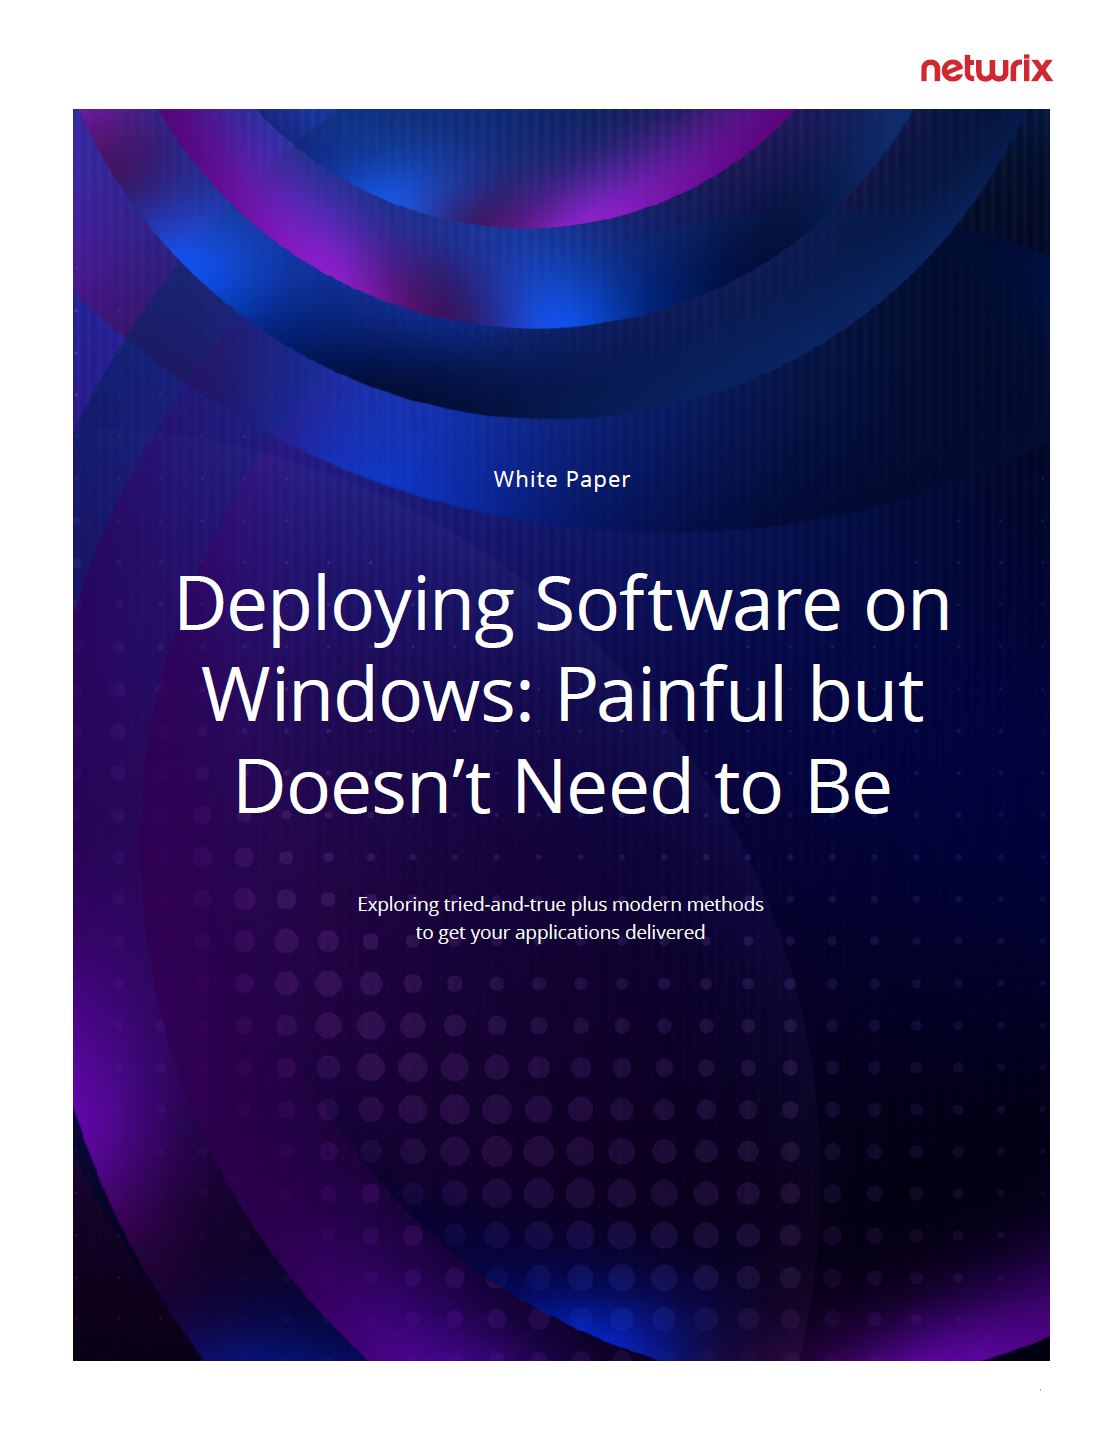 Deploying Software on Windows: Painful but Doesn’t Need to Be